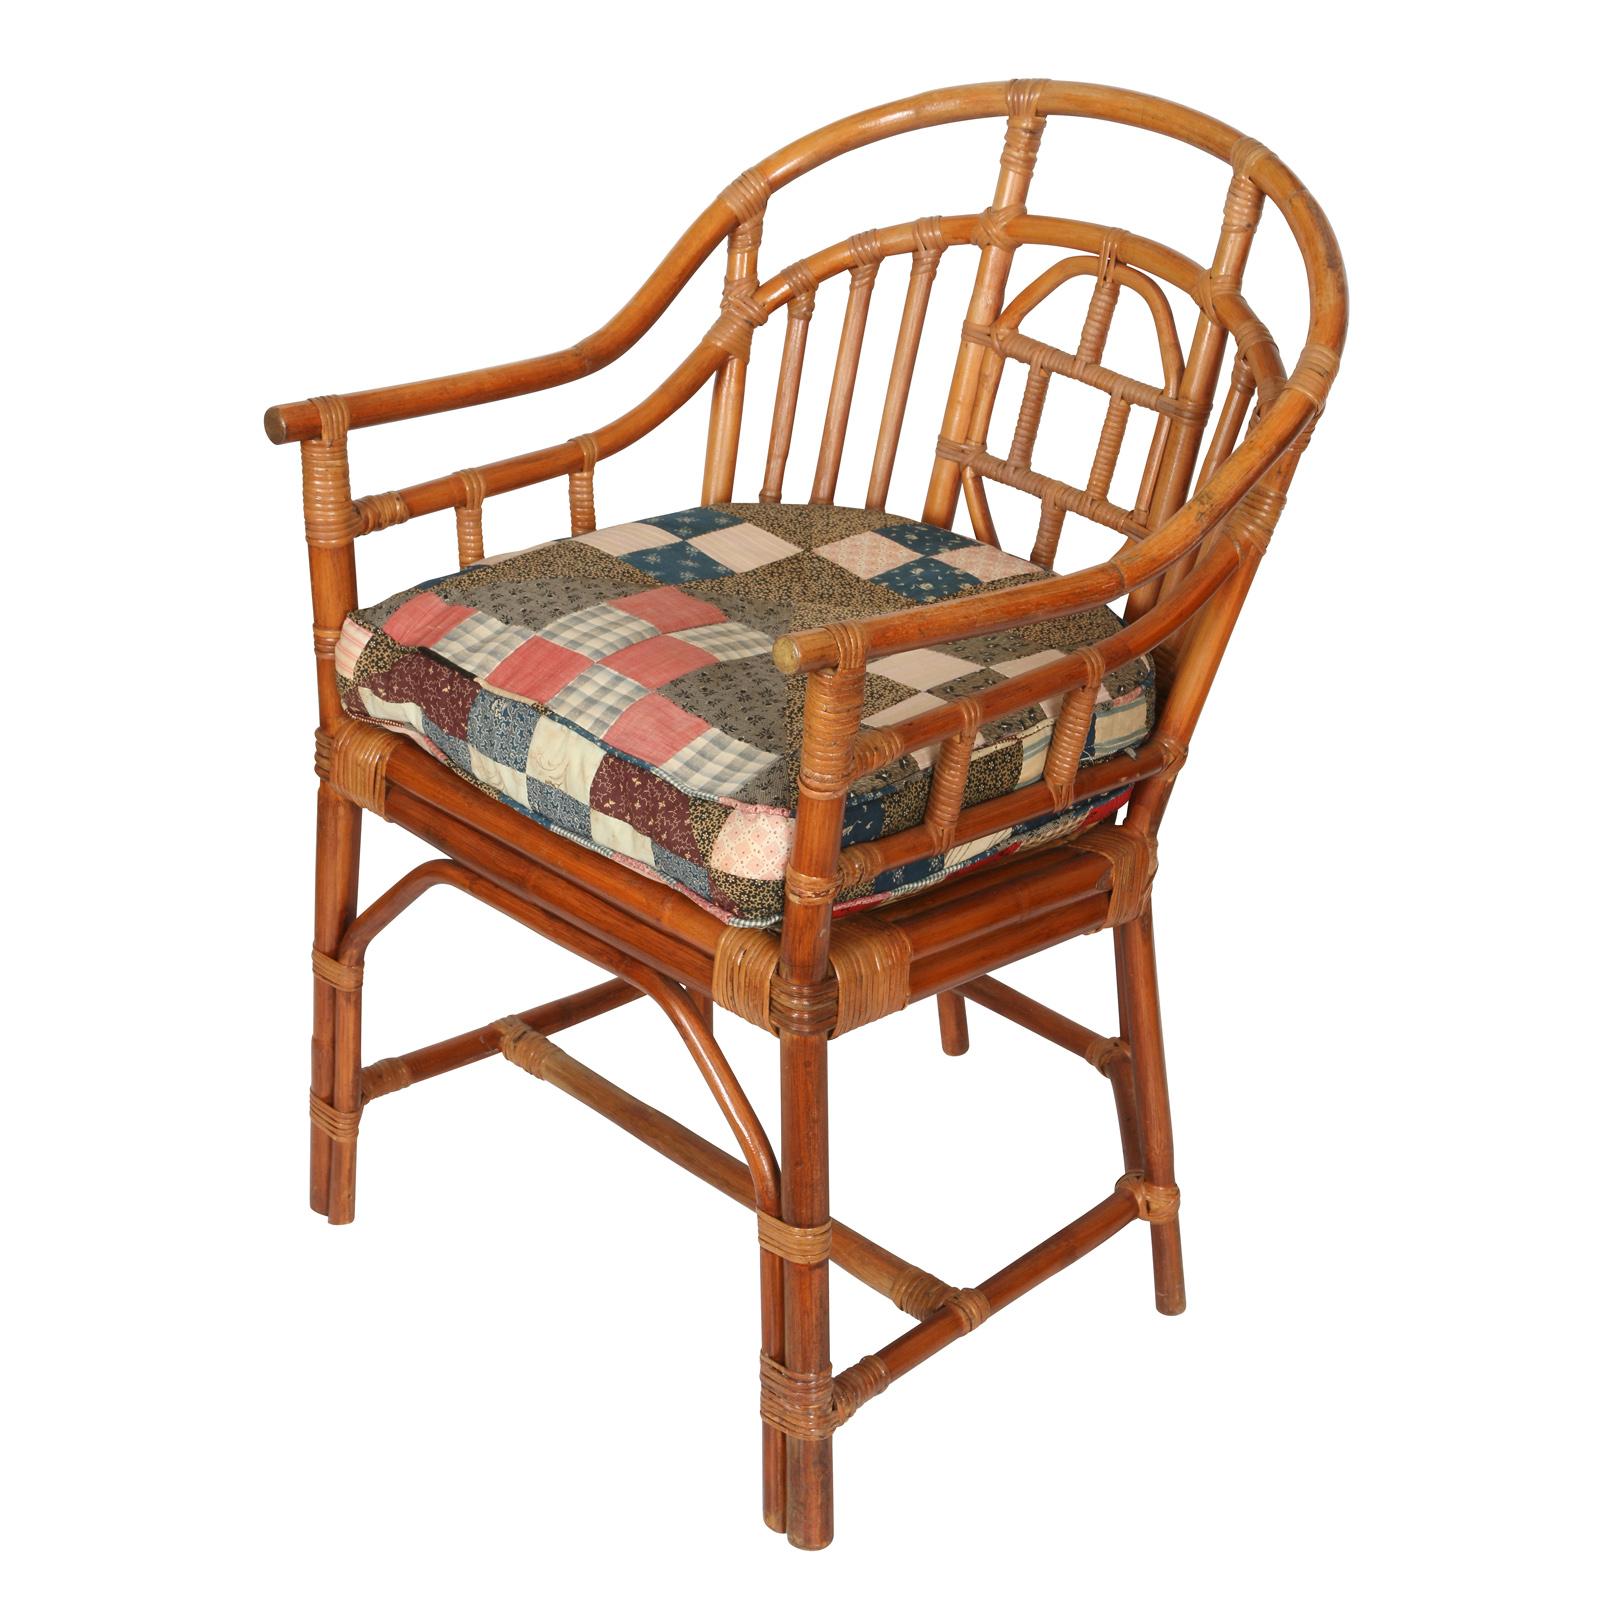 Brighton pavillion curved rattan Chinese arm chair with removable seat cushion.